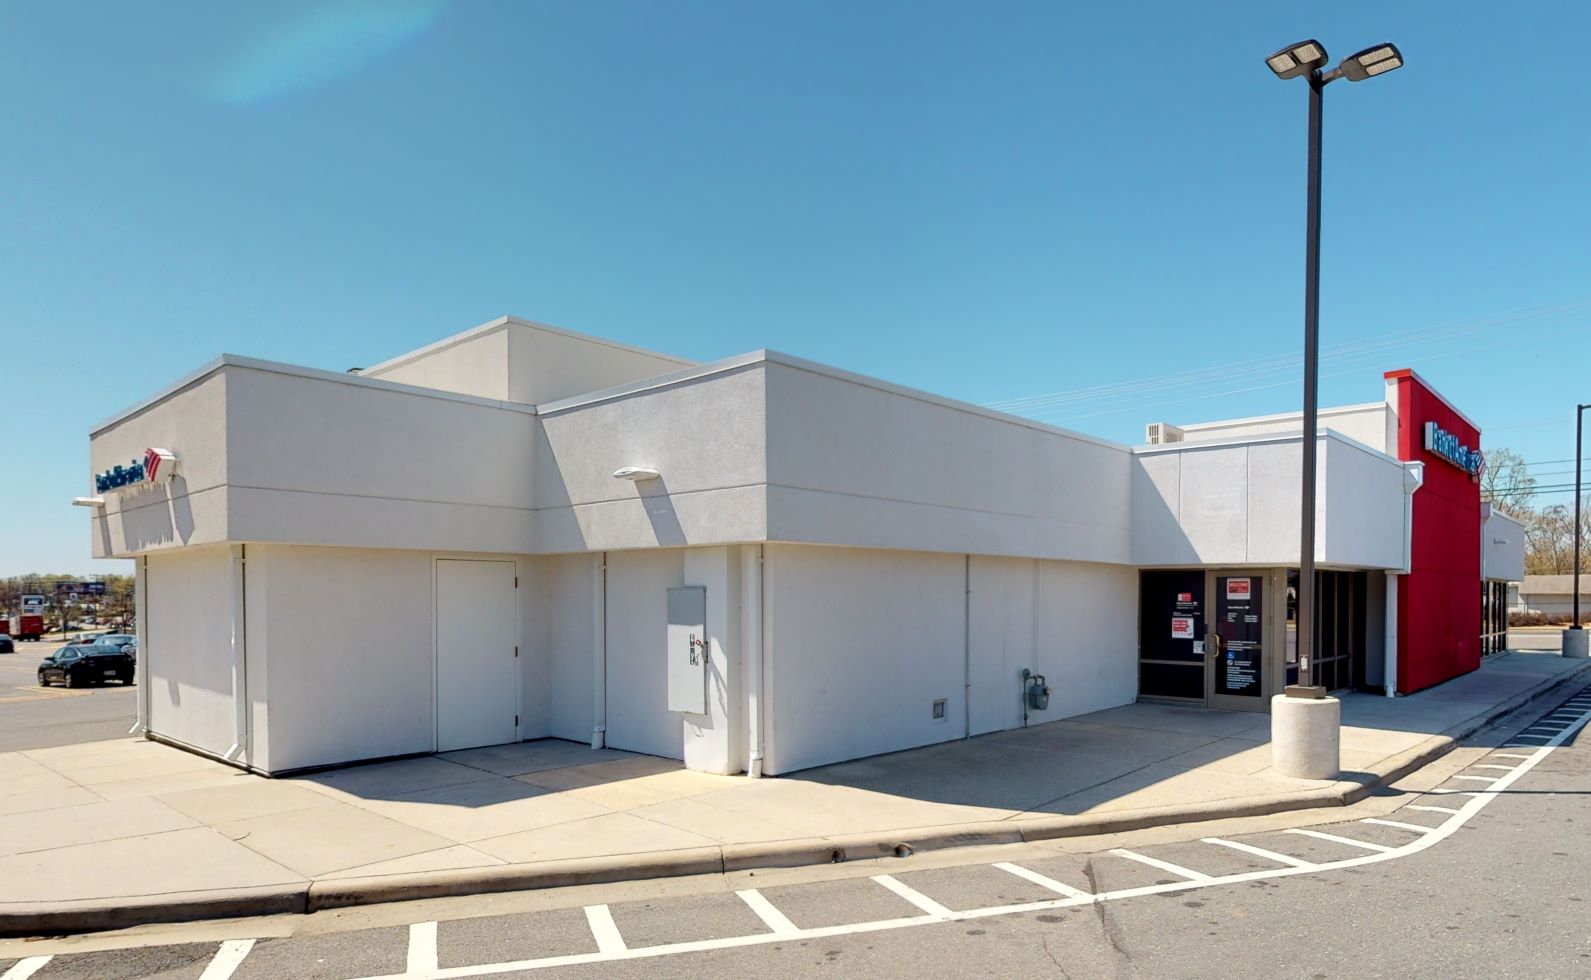 Bank of America financial center with drive-thru ATM | 5801 South Blvd, Charlotte, NC 28217